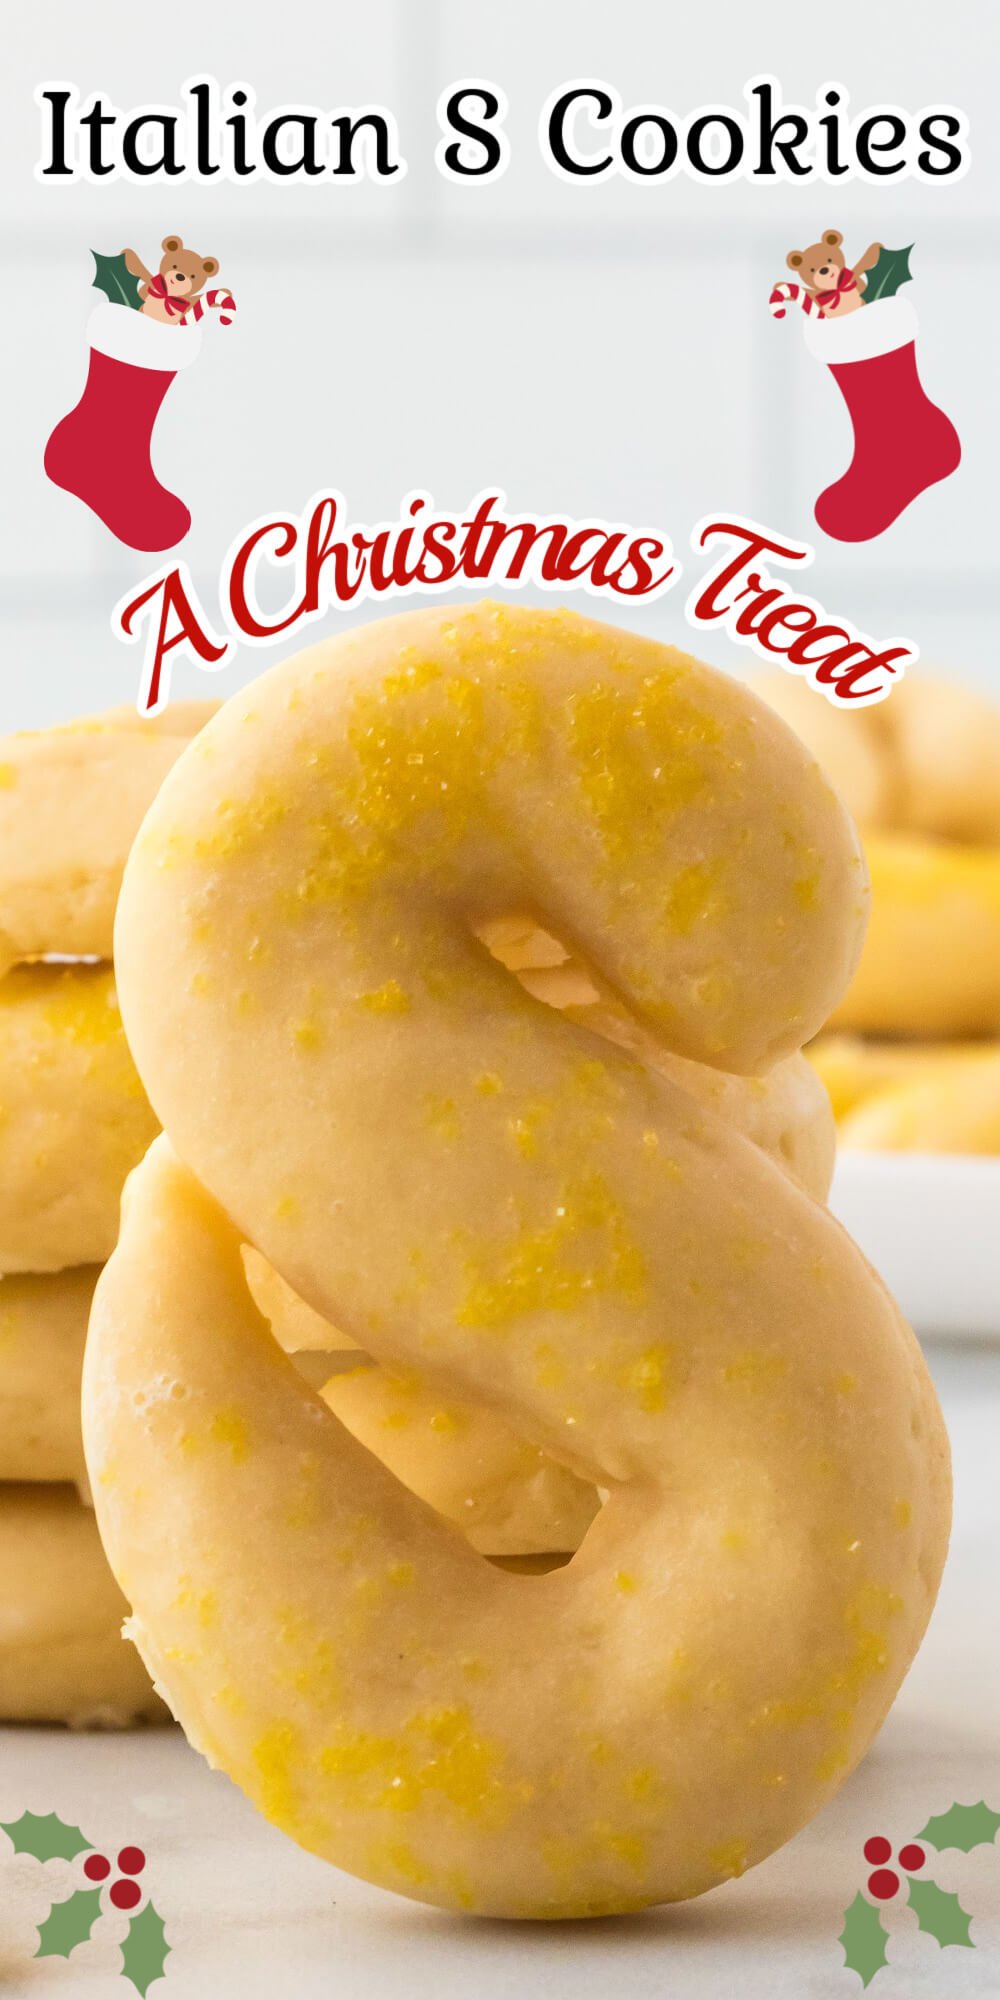 This Italian S Cookie Recipe comes from Southern Italy and is served during the Christmas holidays. The traditional Italia cookie is butter and light in a texture that melts in your mouth. The flavor is butter and lemony with a lemon glaze. They are beautiful on the Christmas cookie tray or in a cookie exchange.